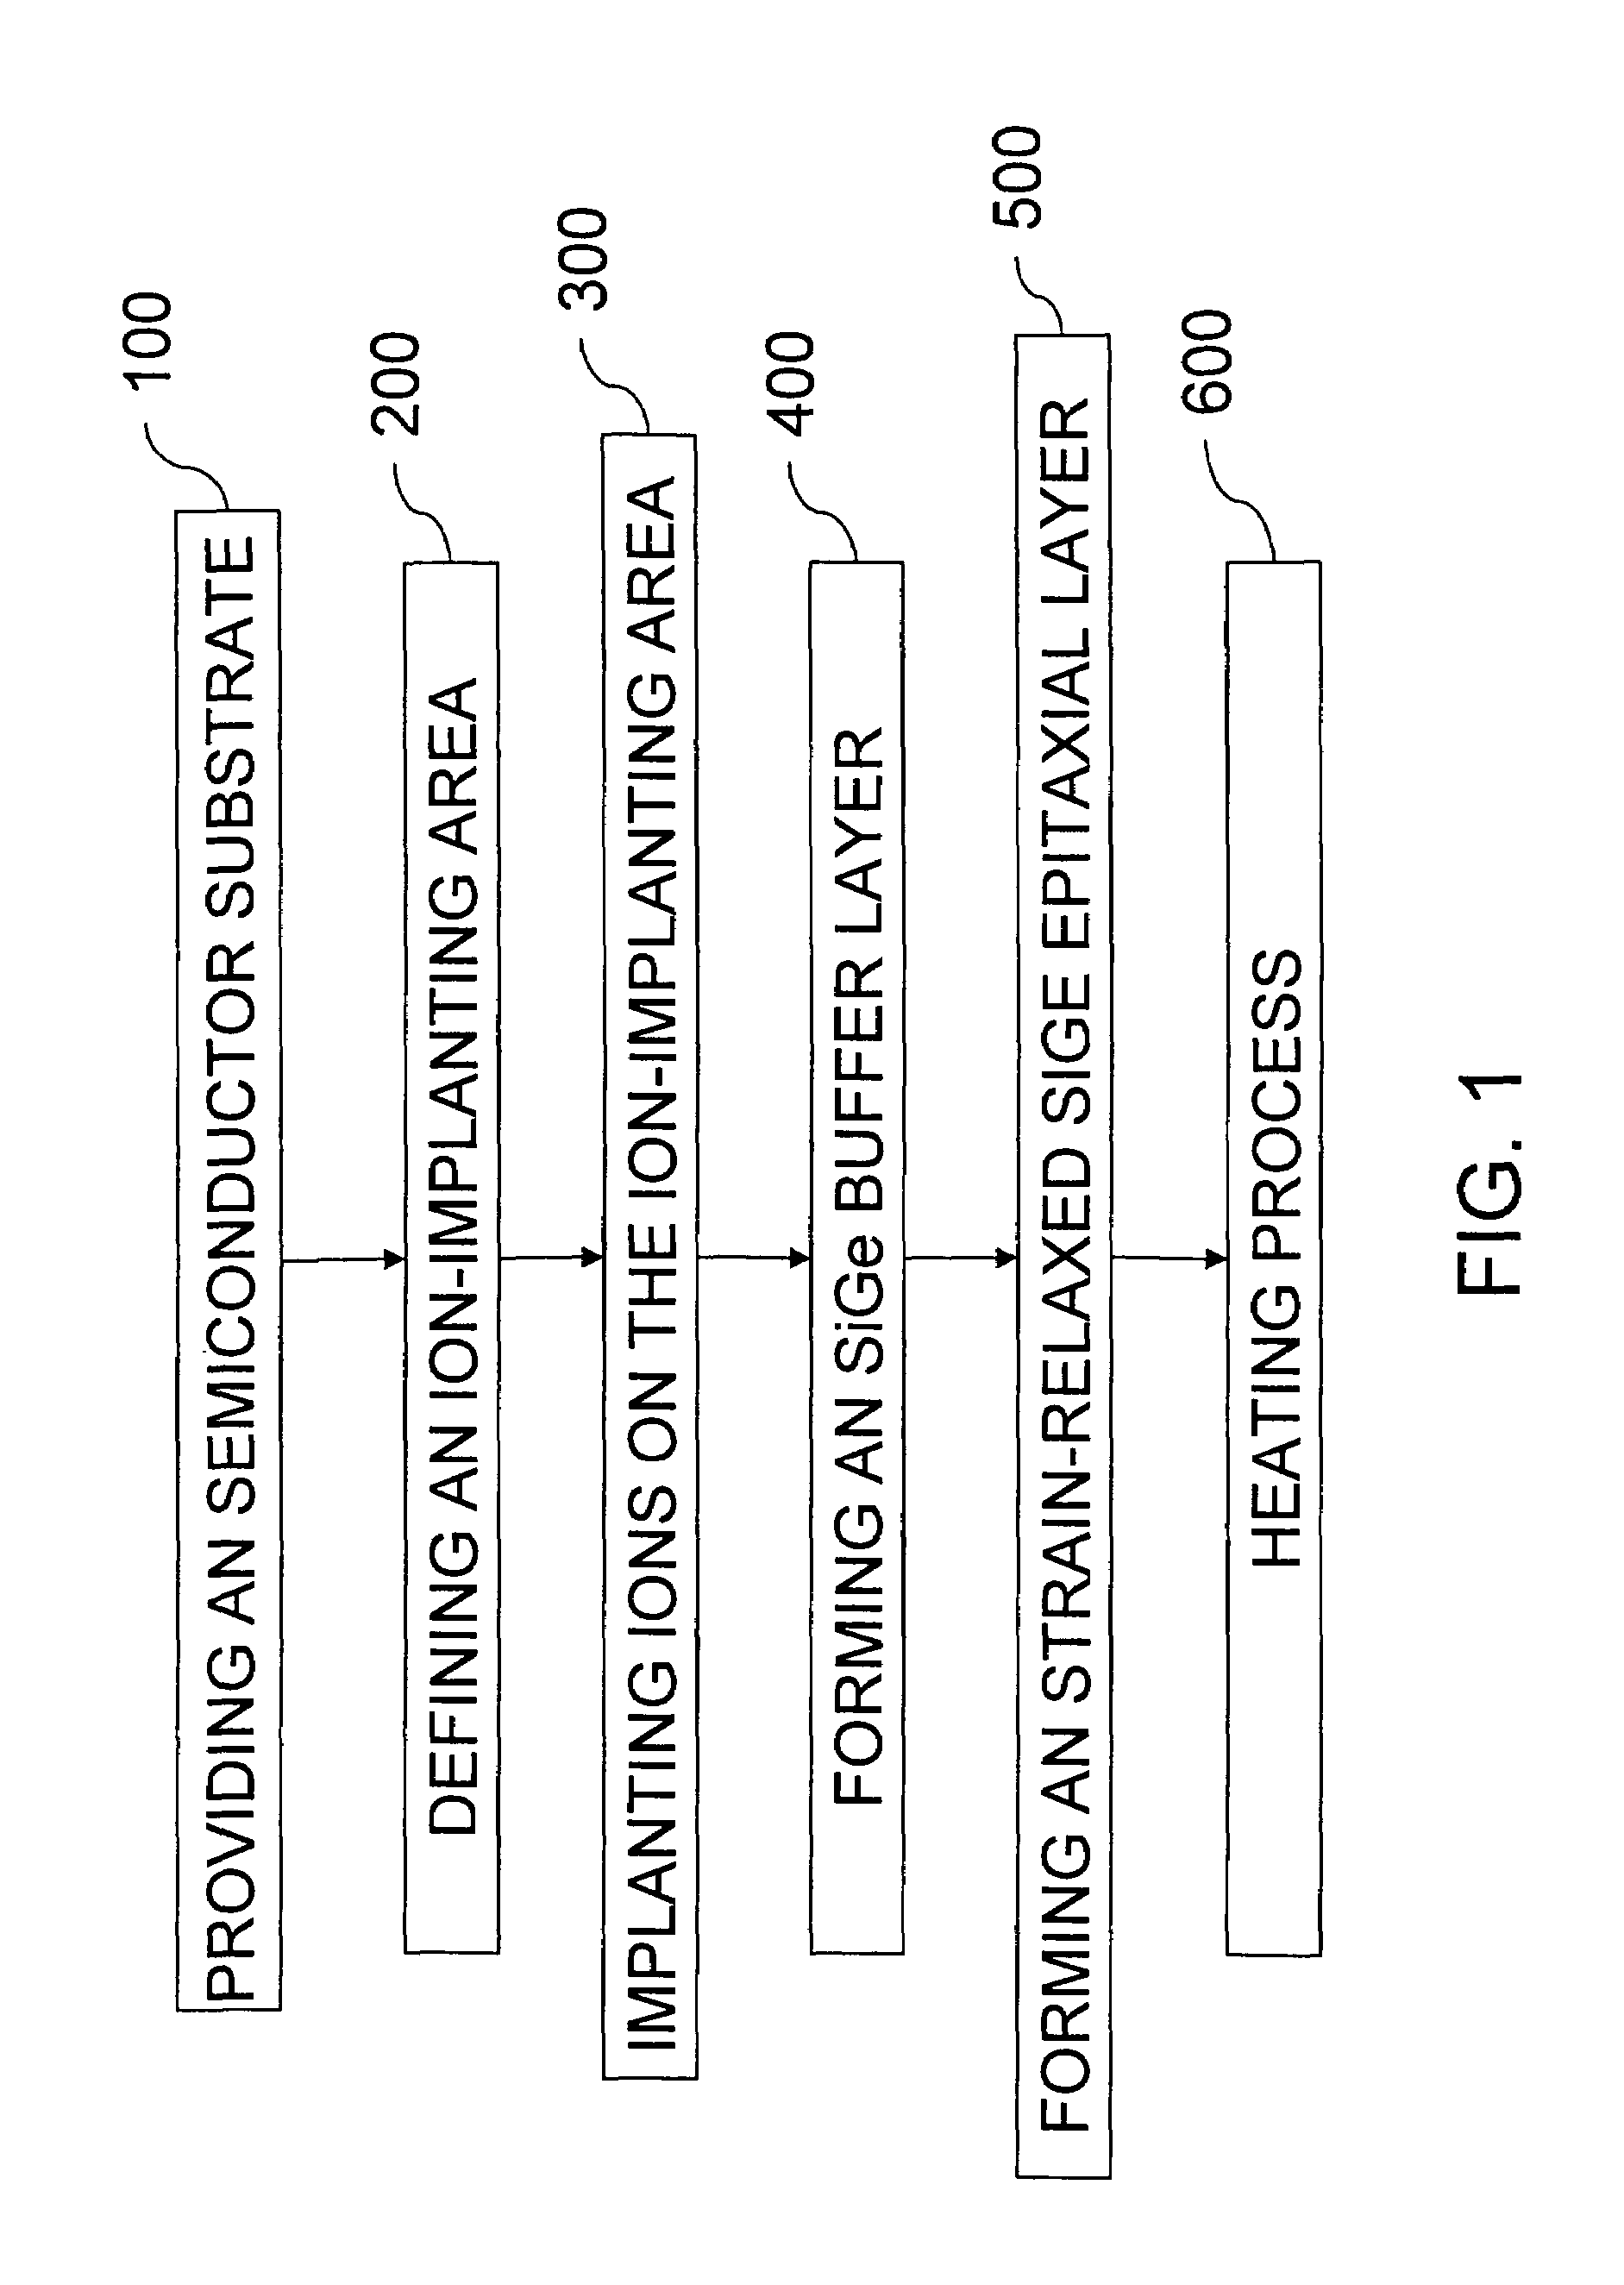 Method to fabricate patterned strain-relaxed SiGe epitaxial with threading dislocation density control